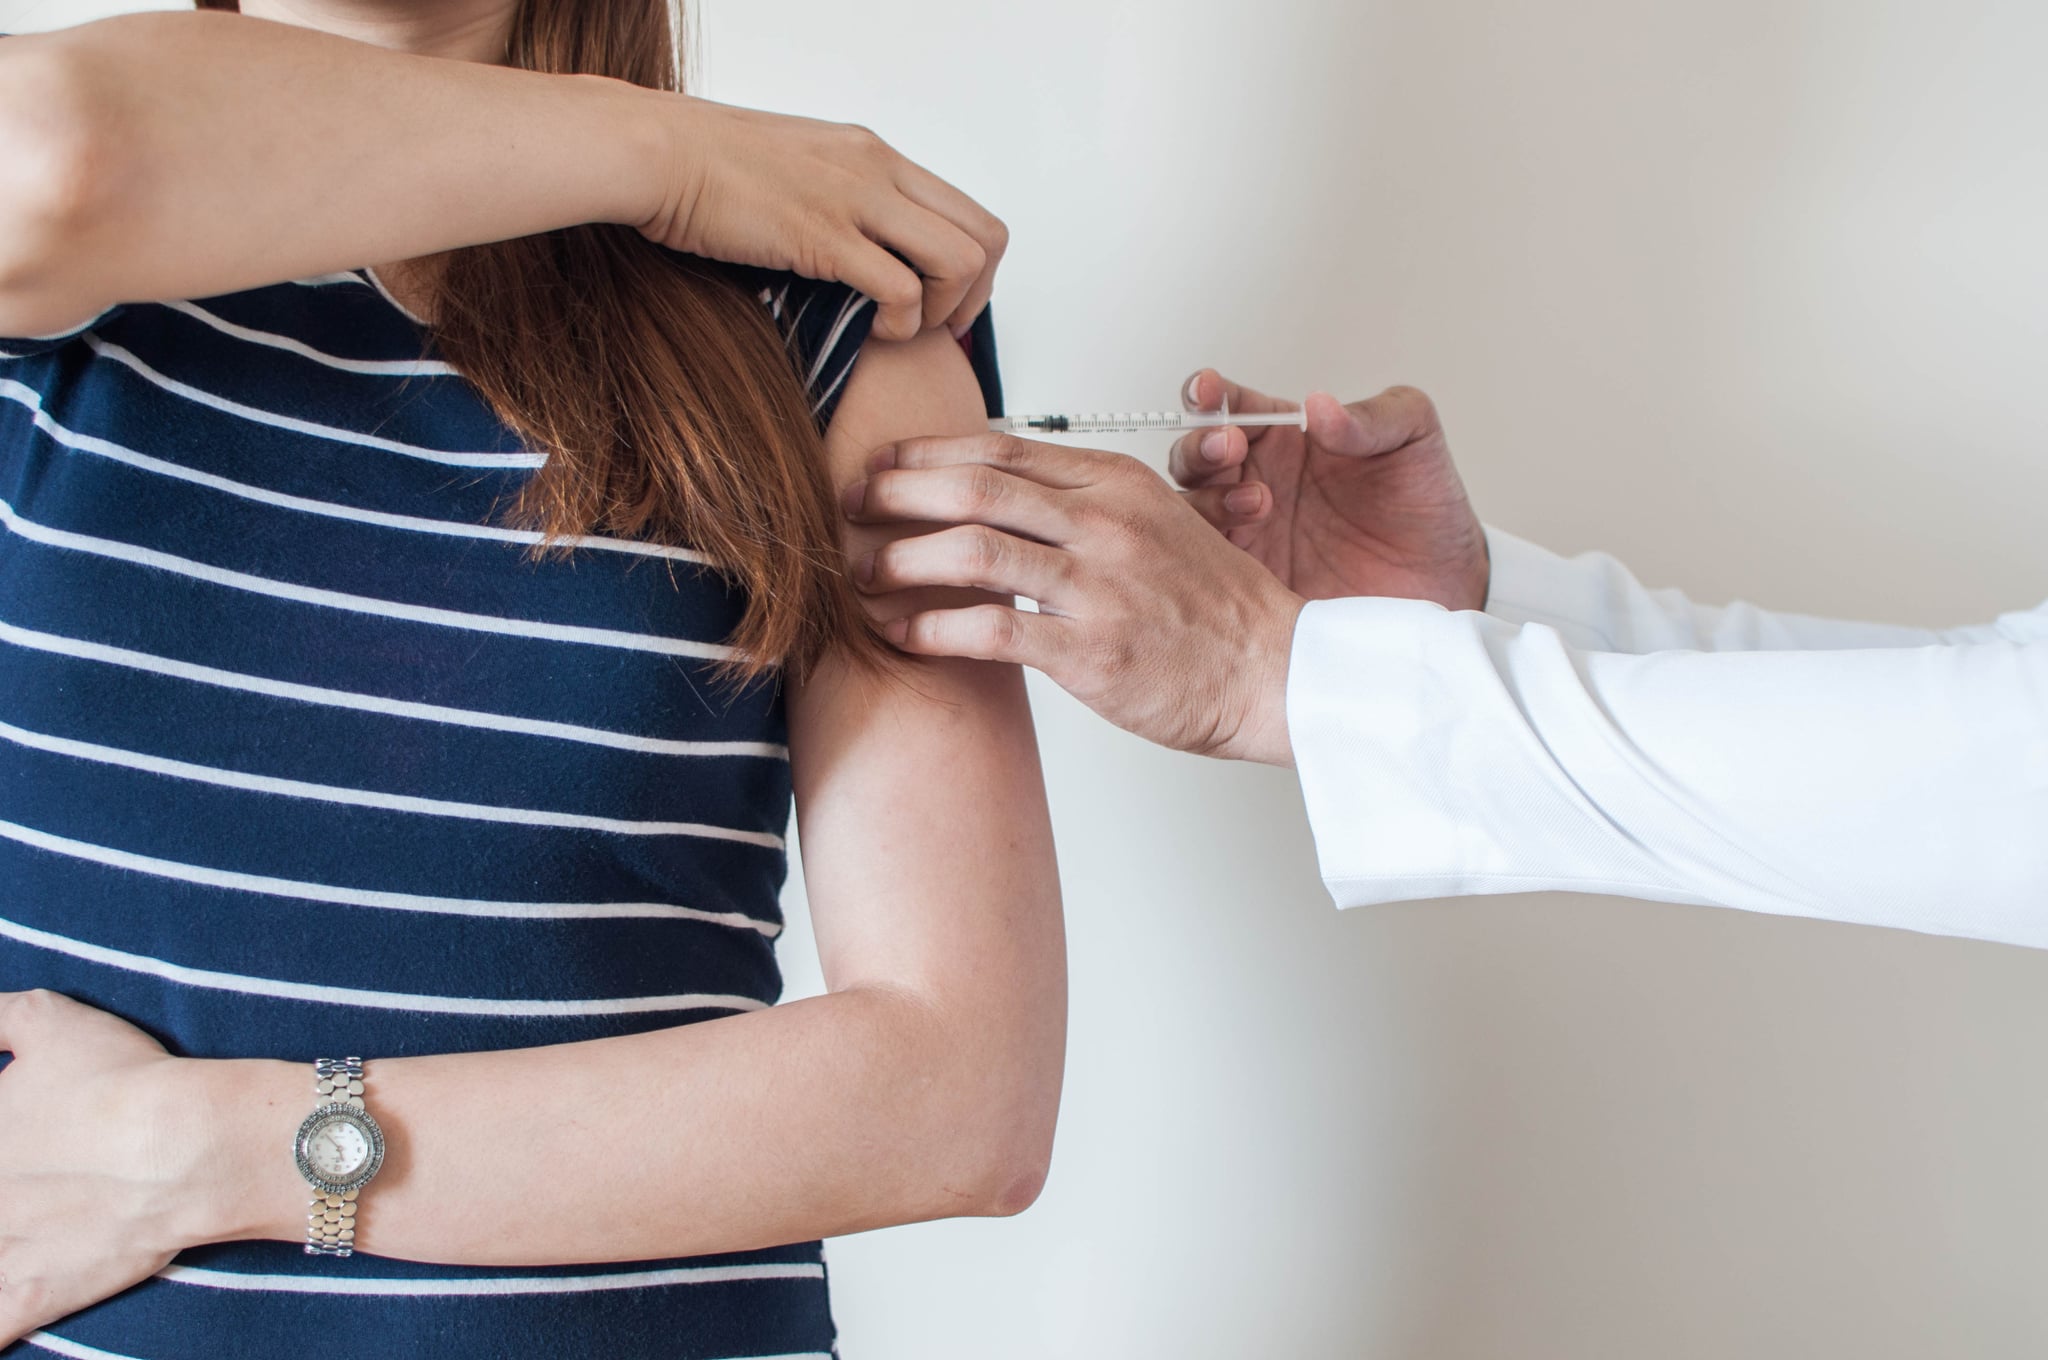 A doctor is giving a vaccine to a young woman on a white background